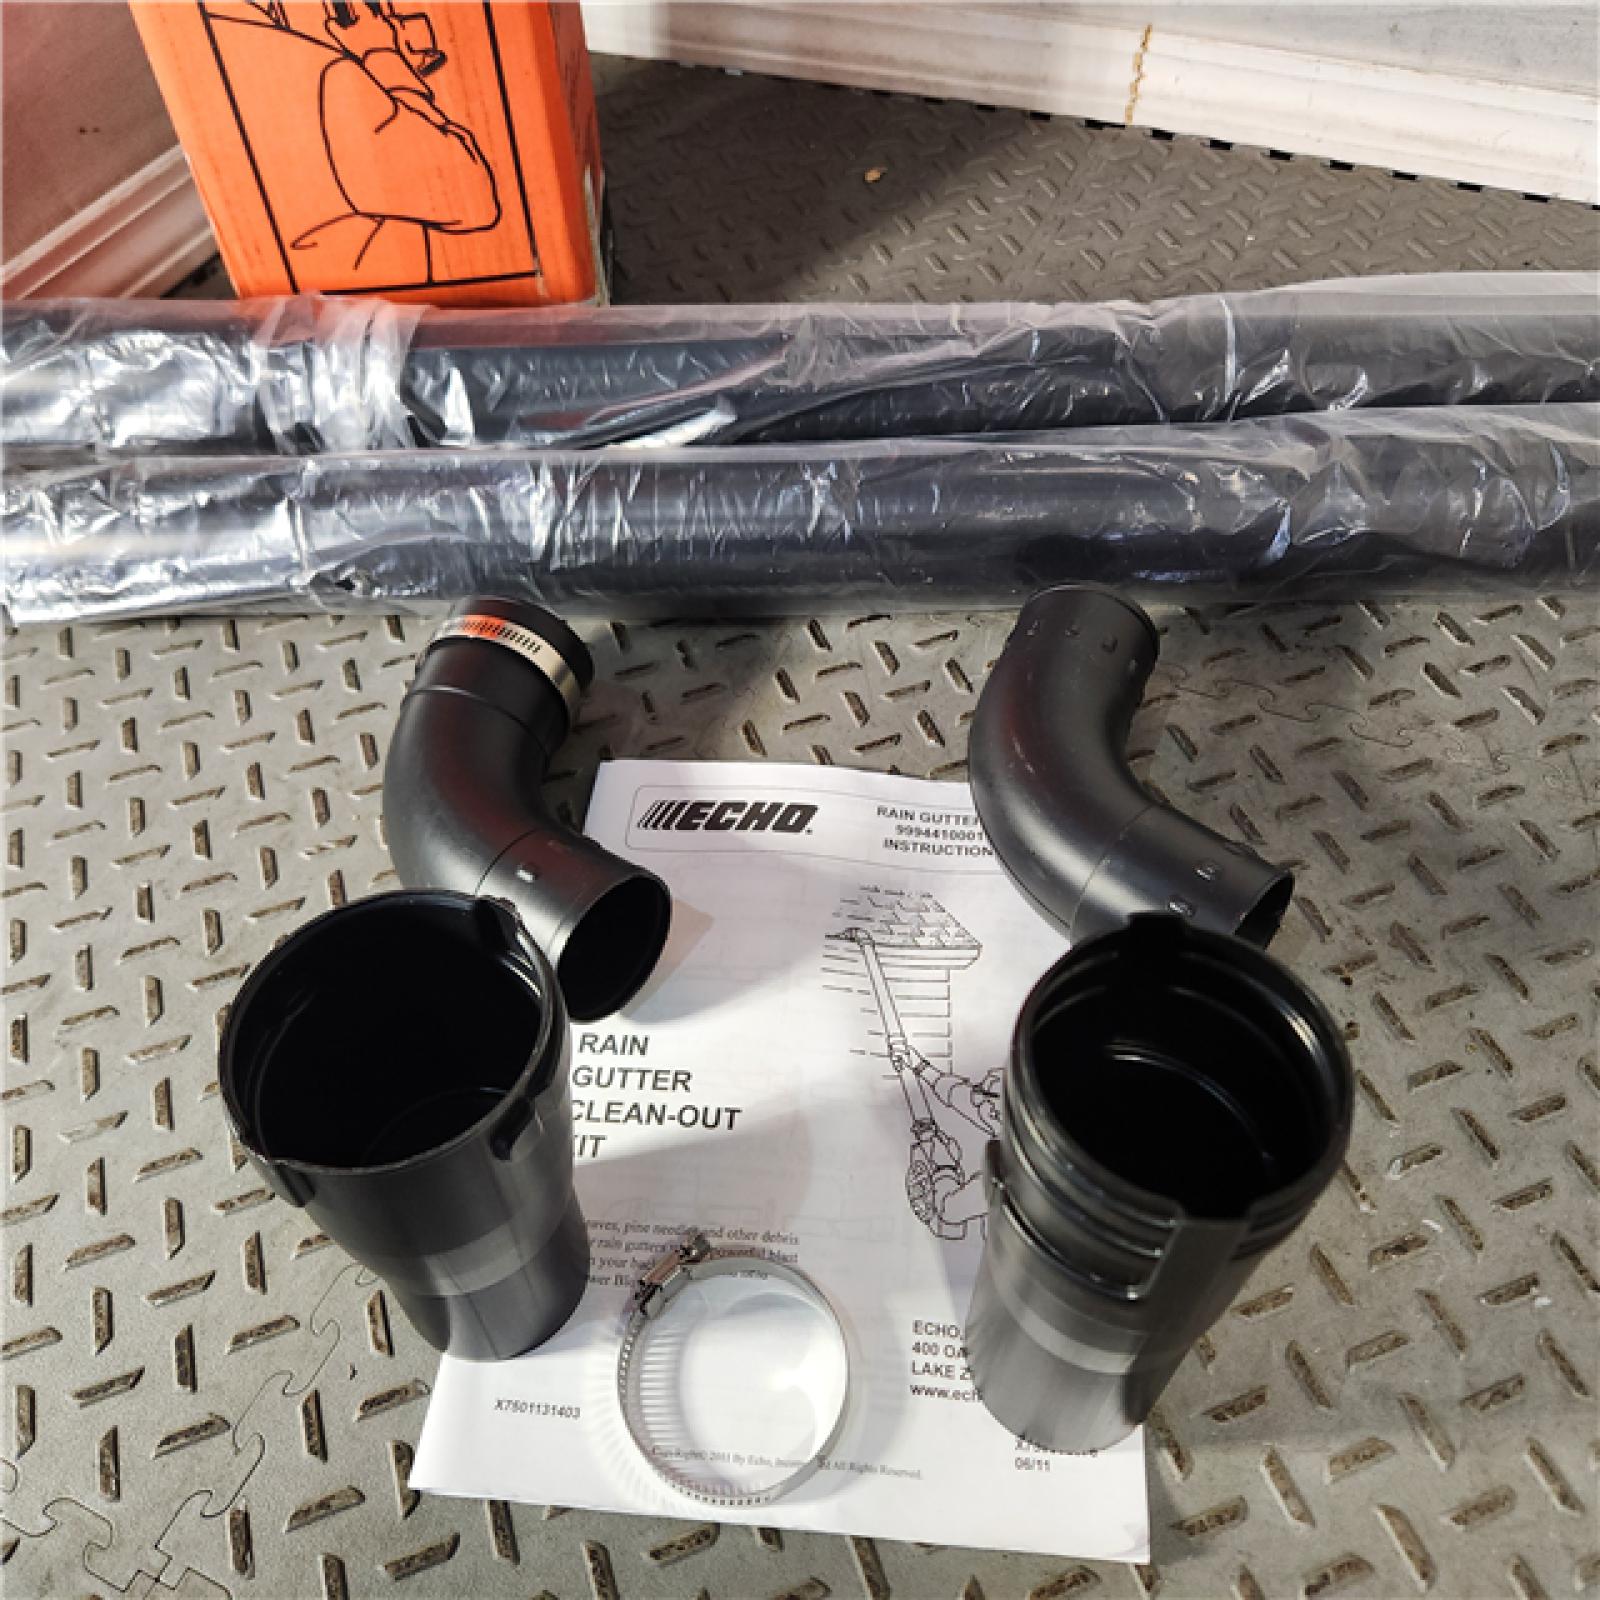 Houston Location - AS-IS Echo-999441-00010 Gutter Cleaning Kit - Appears IN NEW Condition